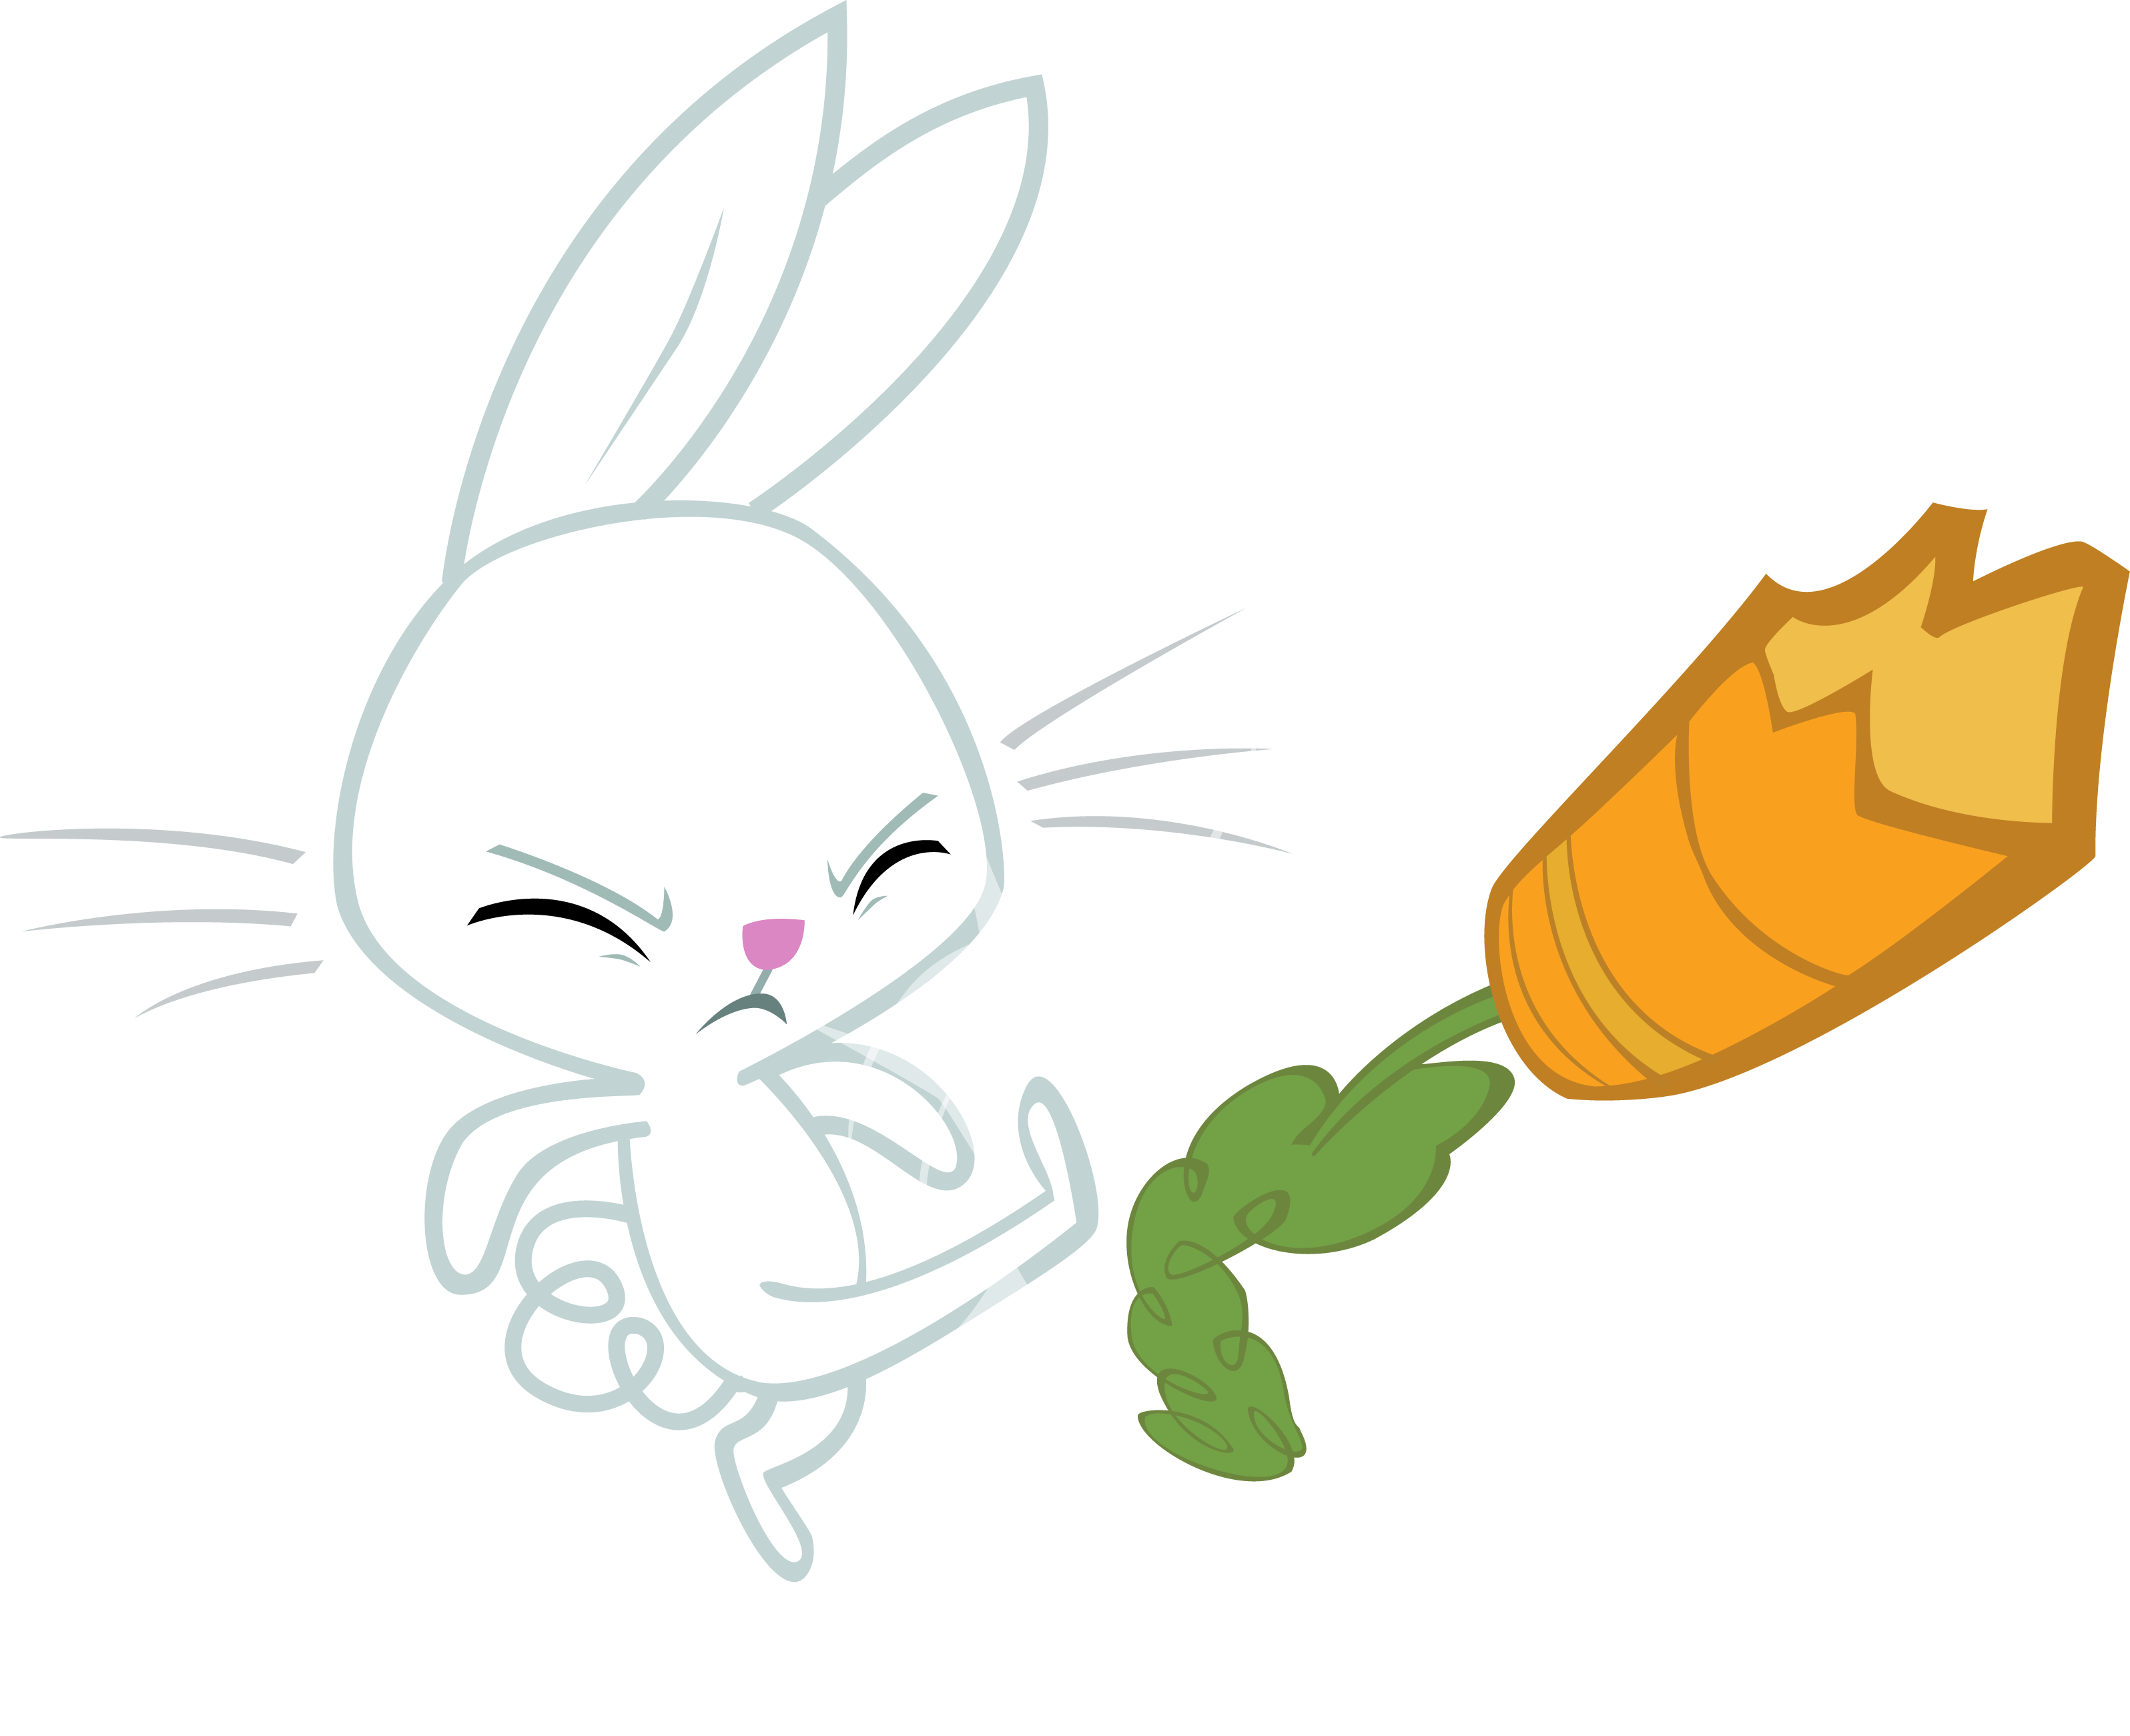 Angel bunny is an. Clipart rabbit angry